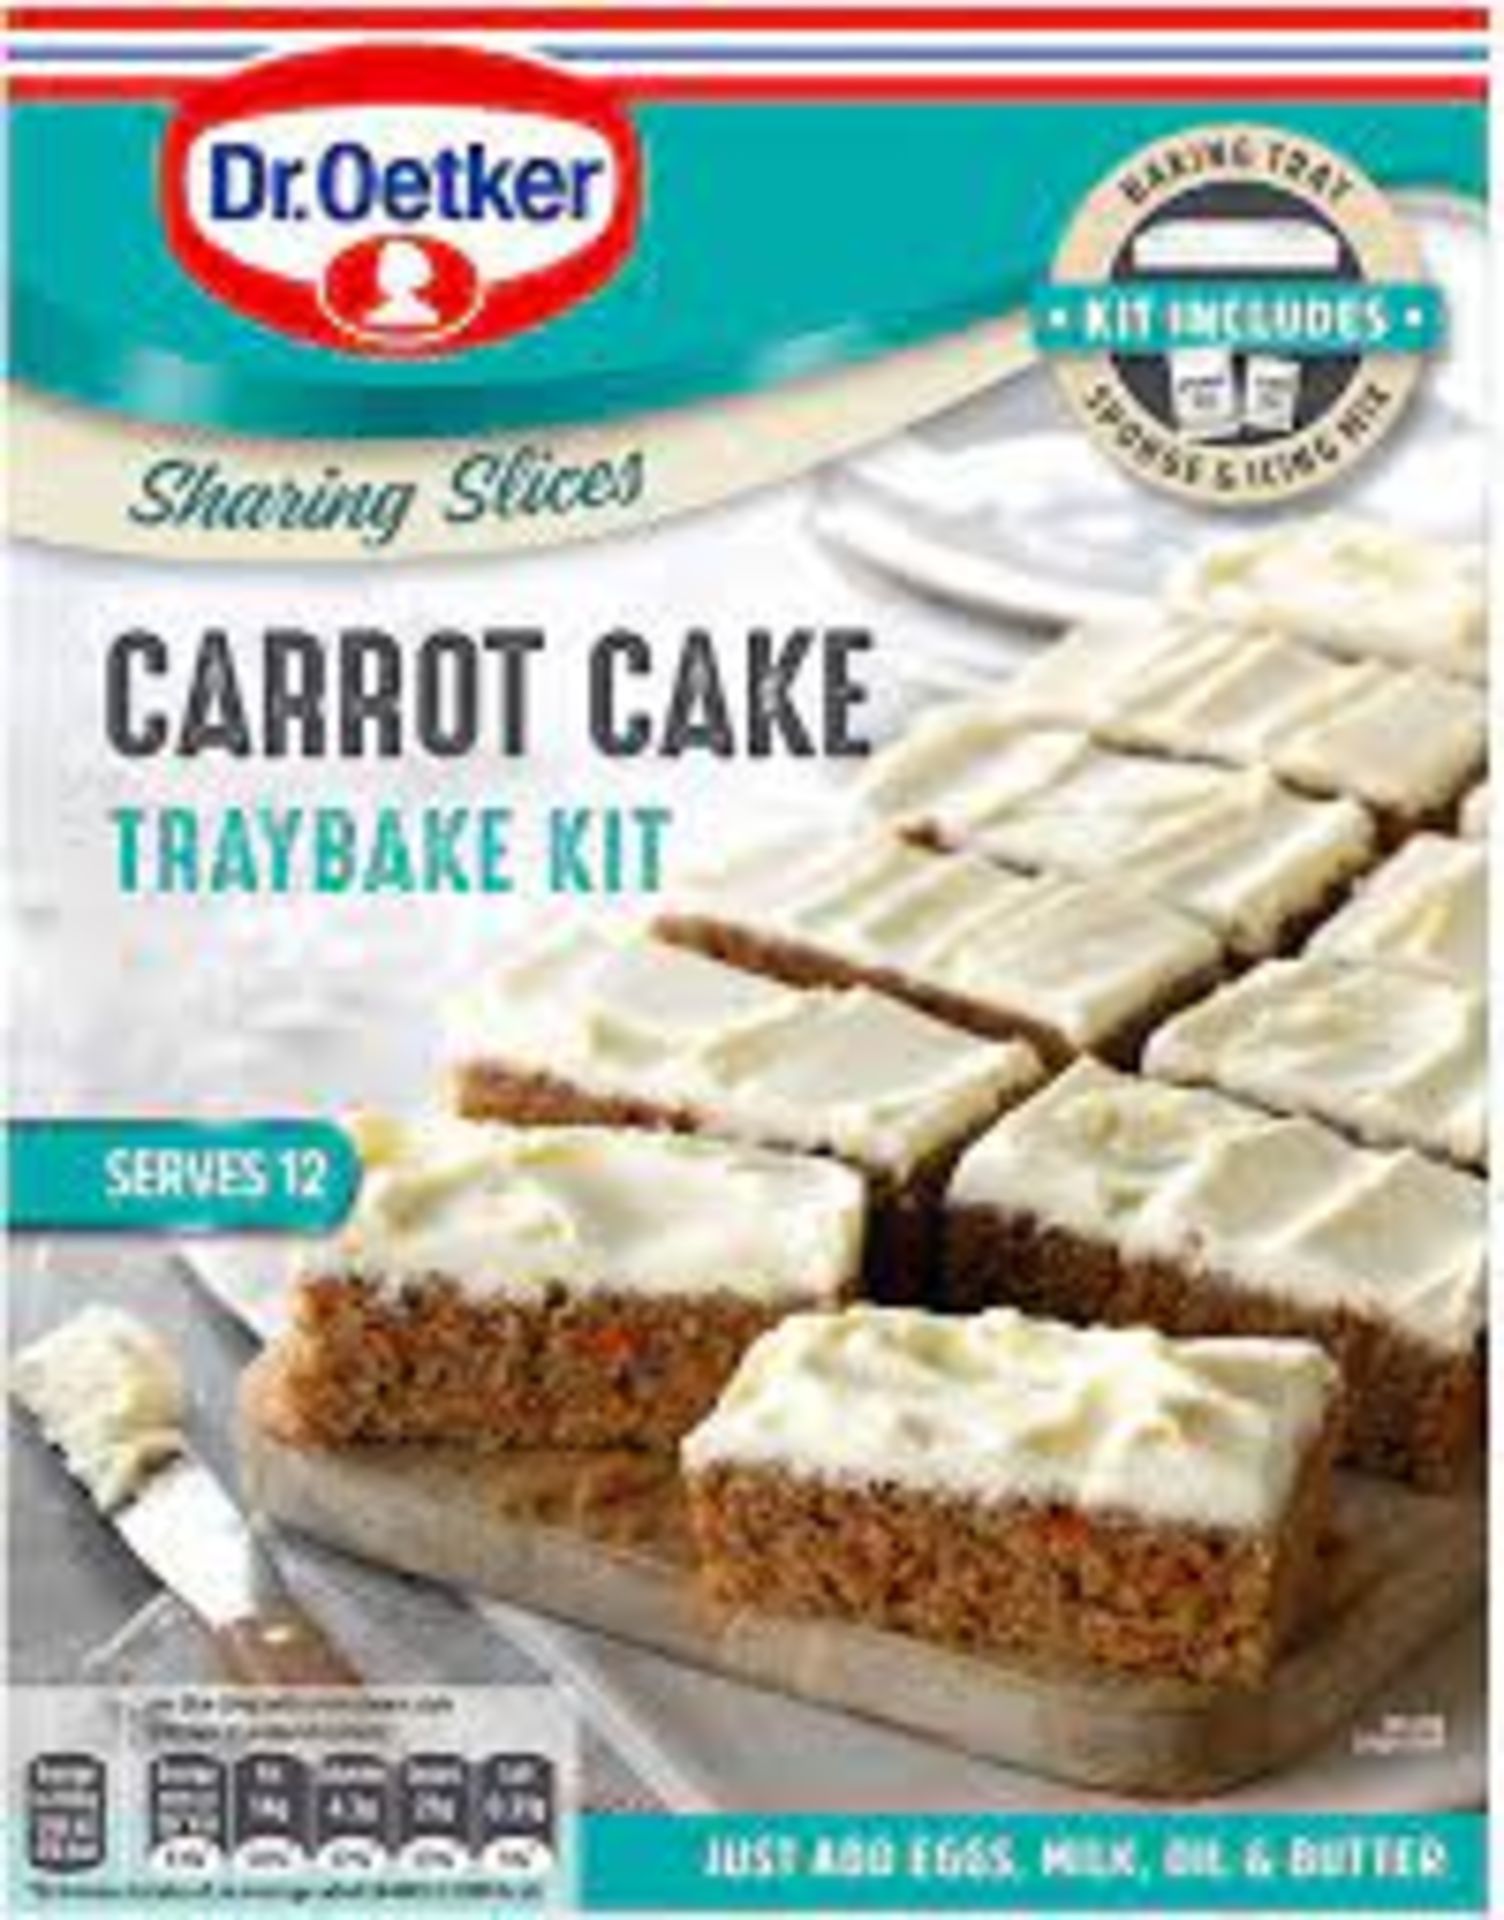 RRP £493 (Approx. Count 43) spW44f1217F 15 x Dr. Oetker Carrot Cake Traybake Kit 425 g, Pack of 4  2